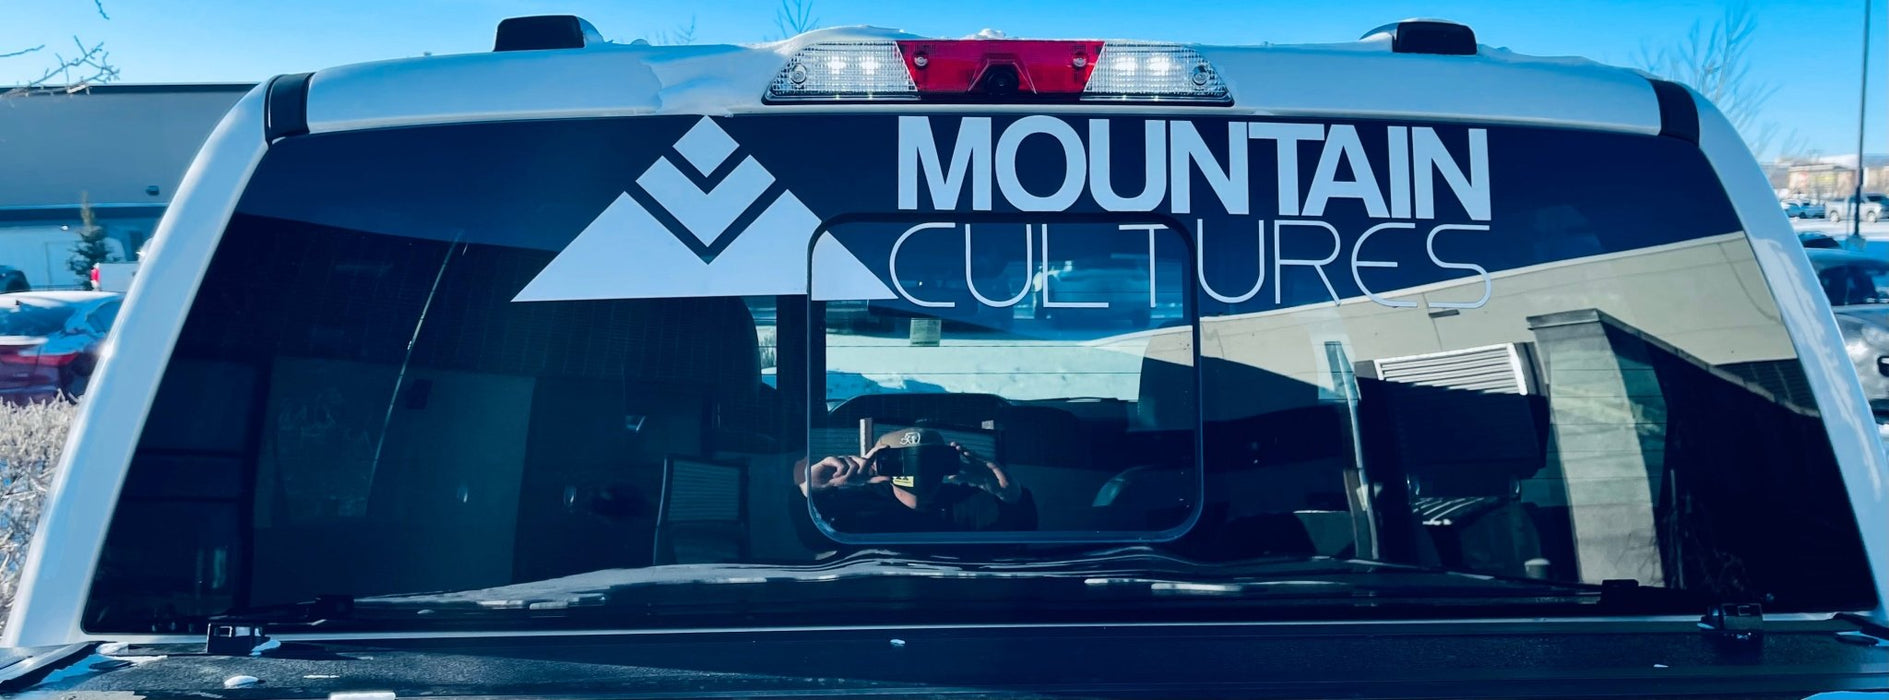 Mountain Cultures Vehicle Sticker - Mountain Cultures